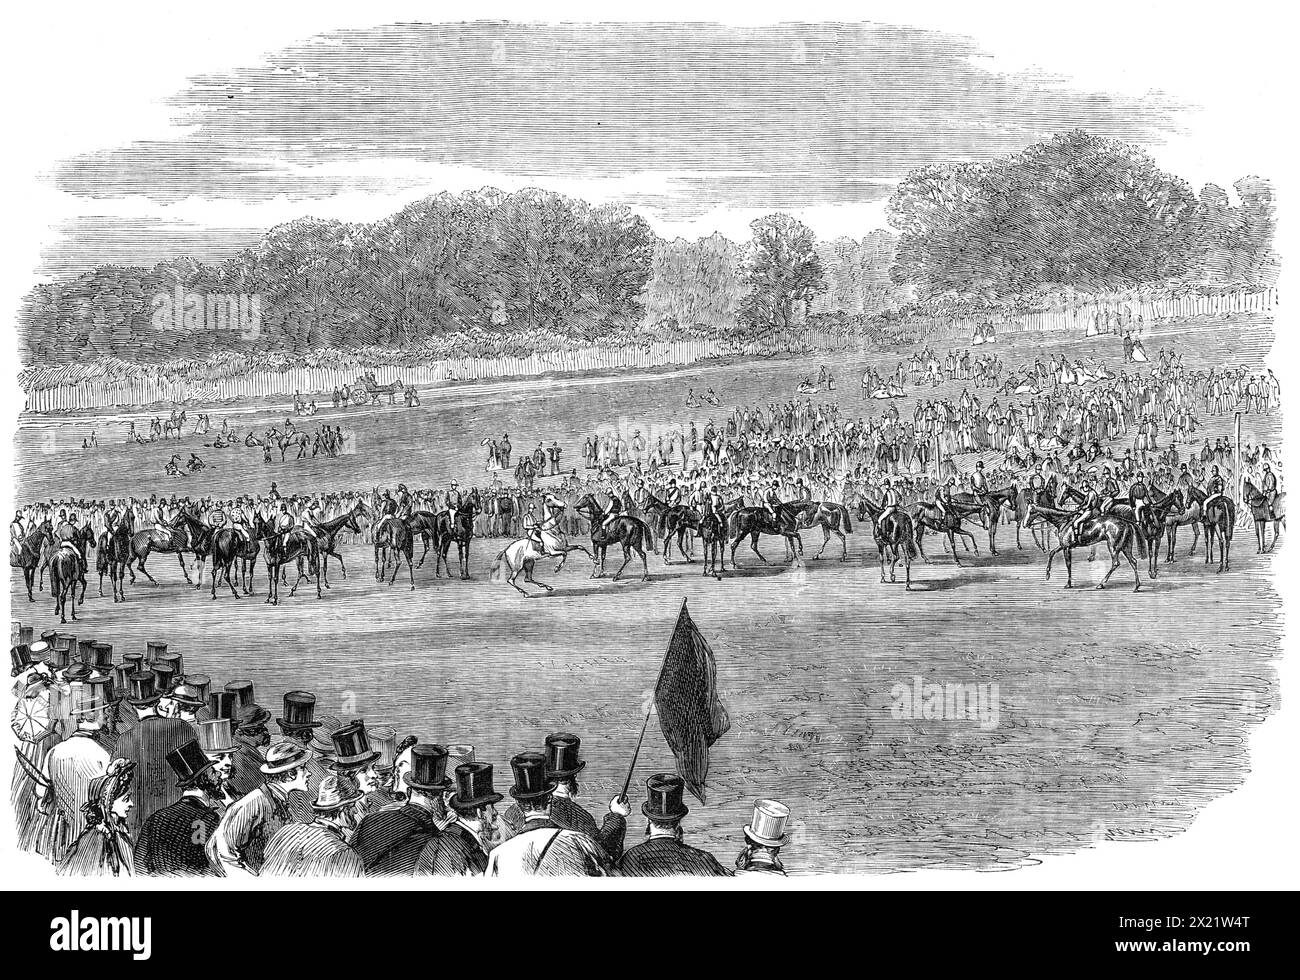 The Start for the Derby - from a photograph by Mr. Herbert Watkins, 1864. 'It is a singular Turf anomaly that the greatest race in the world should be run over perhaps the worst and most dangerous course we have...The hill stops the pace so much...that the bad ones are not half weeded out by the time they reach [Tattenham] Corner. Hence jockeys too often race their horse's heads off to get well round it in the front rank, for fear of the beaten horses falling back and knocking them out of their stride at the critical moment...However, the Grand Stand folk like to see the race from end to end; Stock Photo